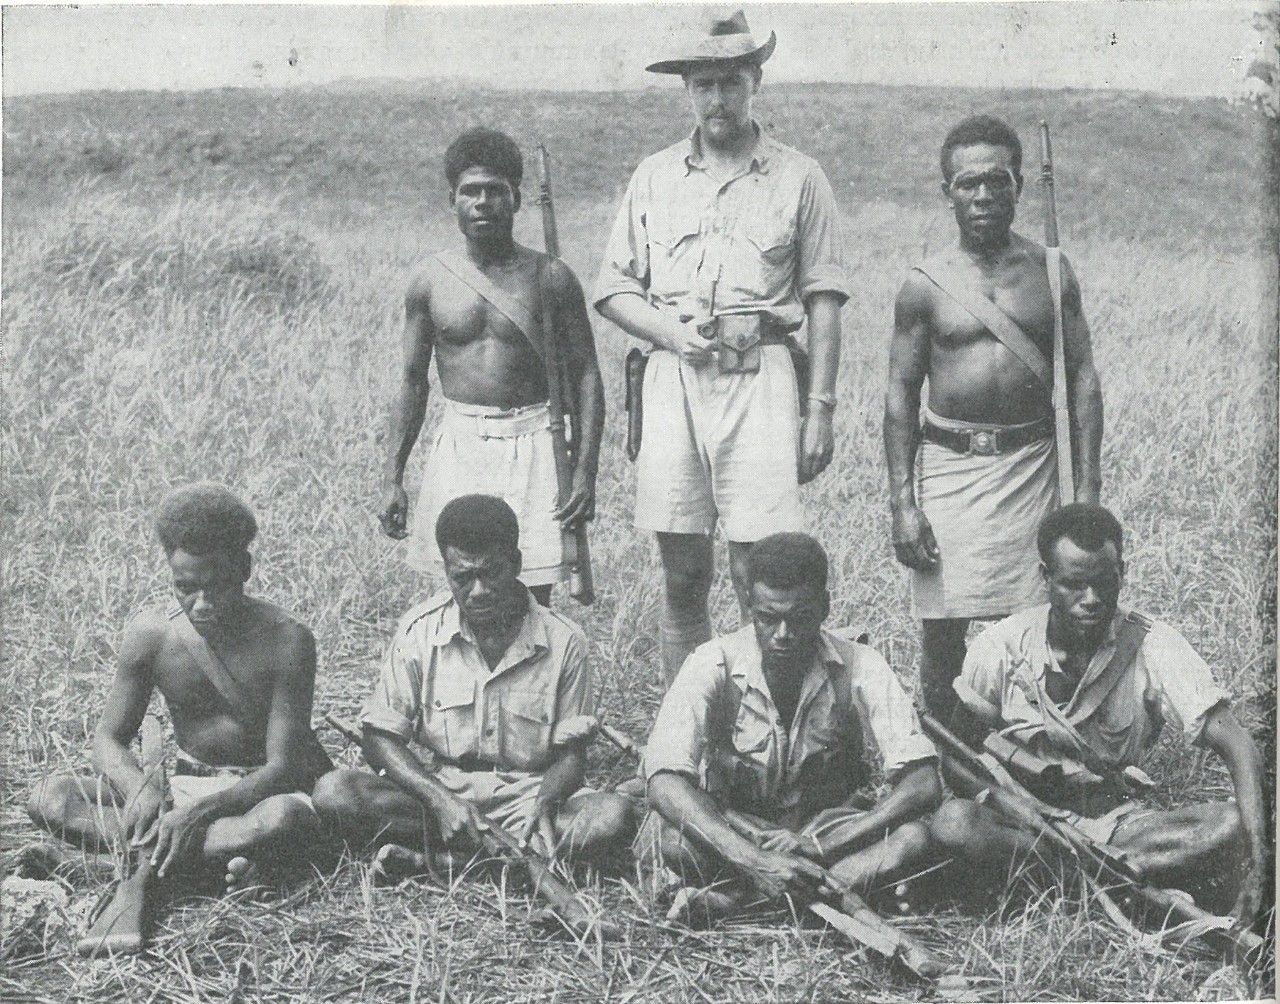 LOYAL NATIVES such as these, together with their leader, Captain Martin Clemens, Australian government representative on Guadalcanal (even while in Japanese hands) rendered invaluable services to the Marines. These natives were all members of the...